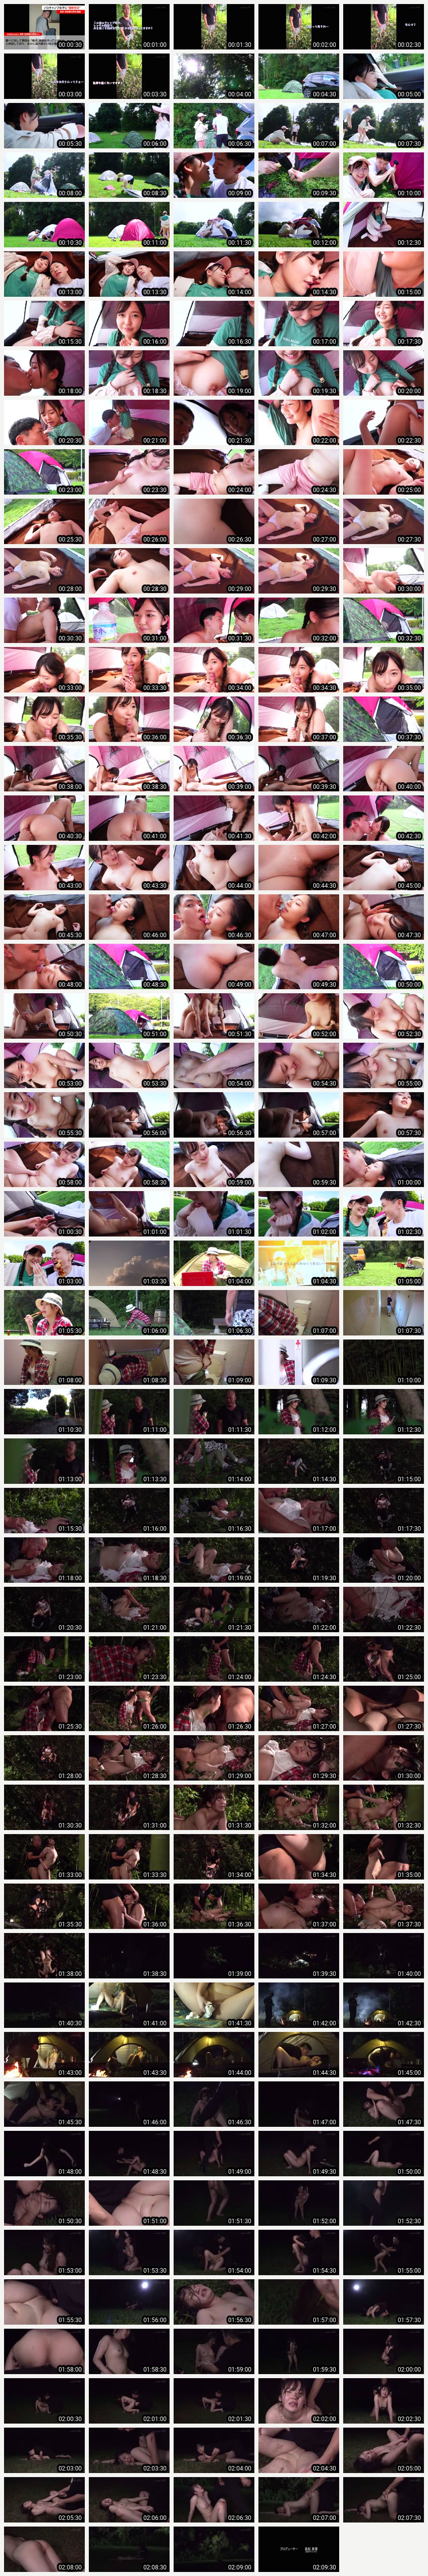 SUWK-005 storyboard screenshot ``It was a campsite where women could enjoy it alone...'' A beautiful solo camper was targeted, ambushed in an outdoor toilet by a stranger, followed, and raped Mirei Aoi